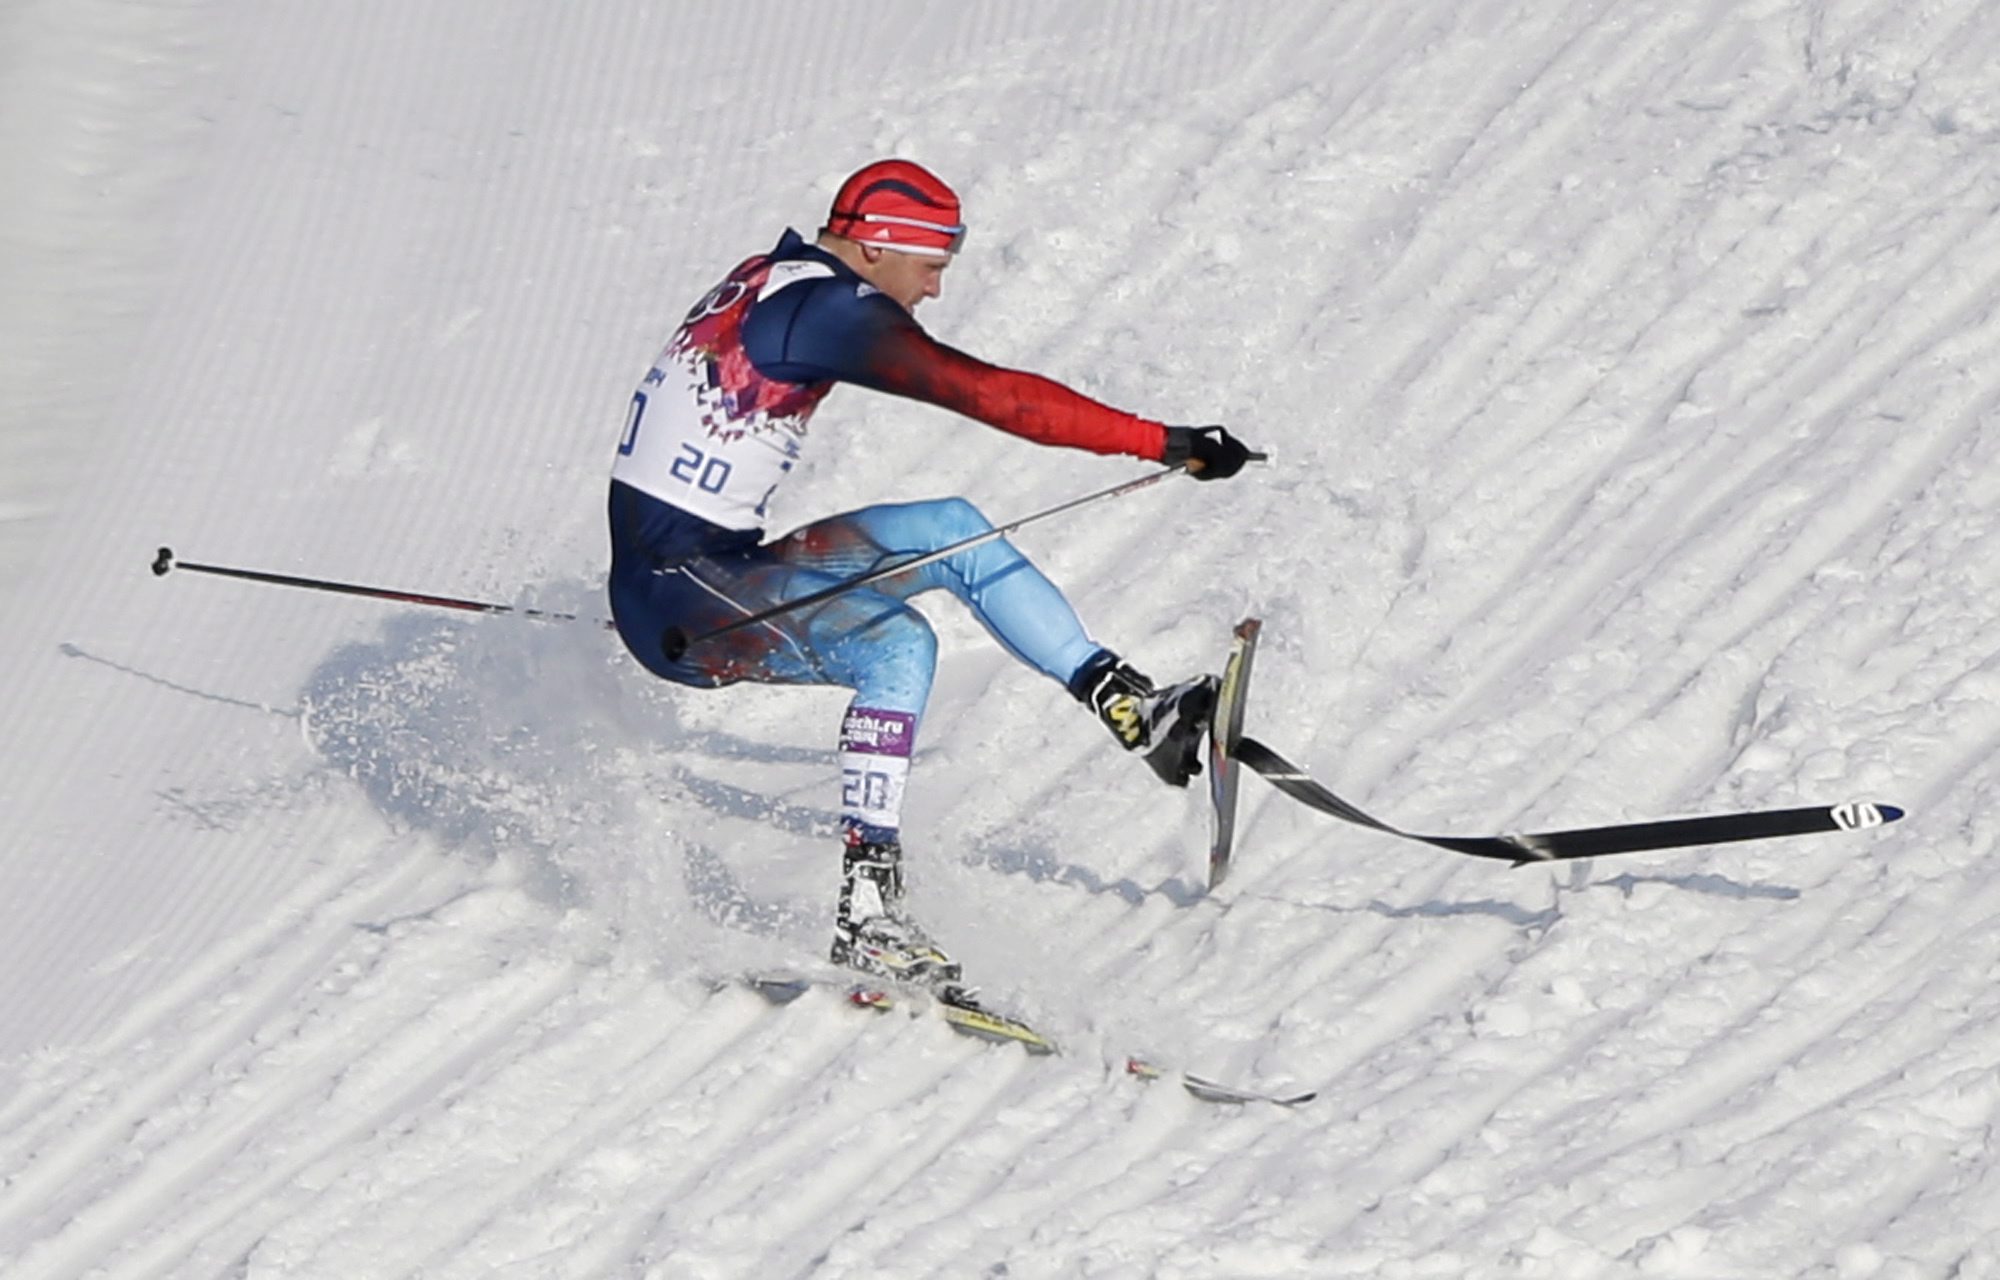 Russia's Anton Gafarov falls with a broken ski during his men's semifinal of the cross-country sprint at the 2014 Winter Olympics, Tuesday, Feb. 11, 2014, in Krasnaya Polyana, Russia. (AP Photo/Matthias Schrader)